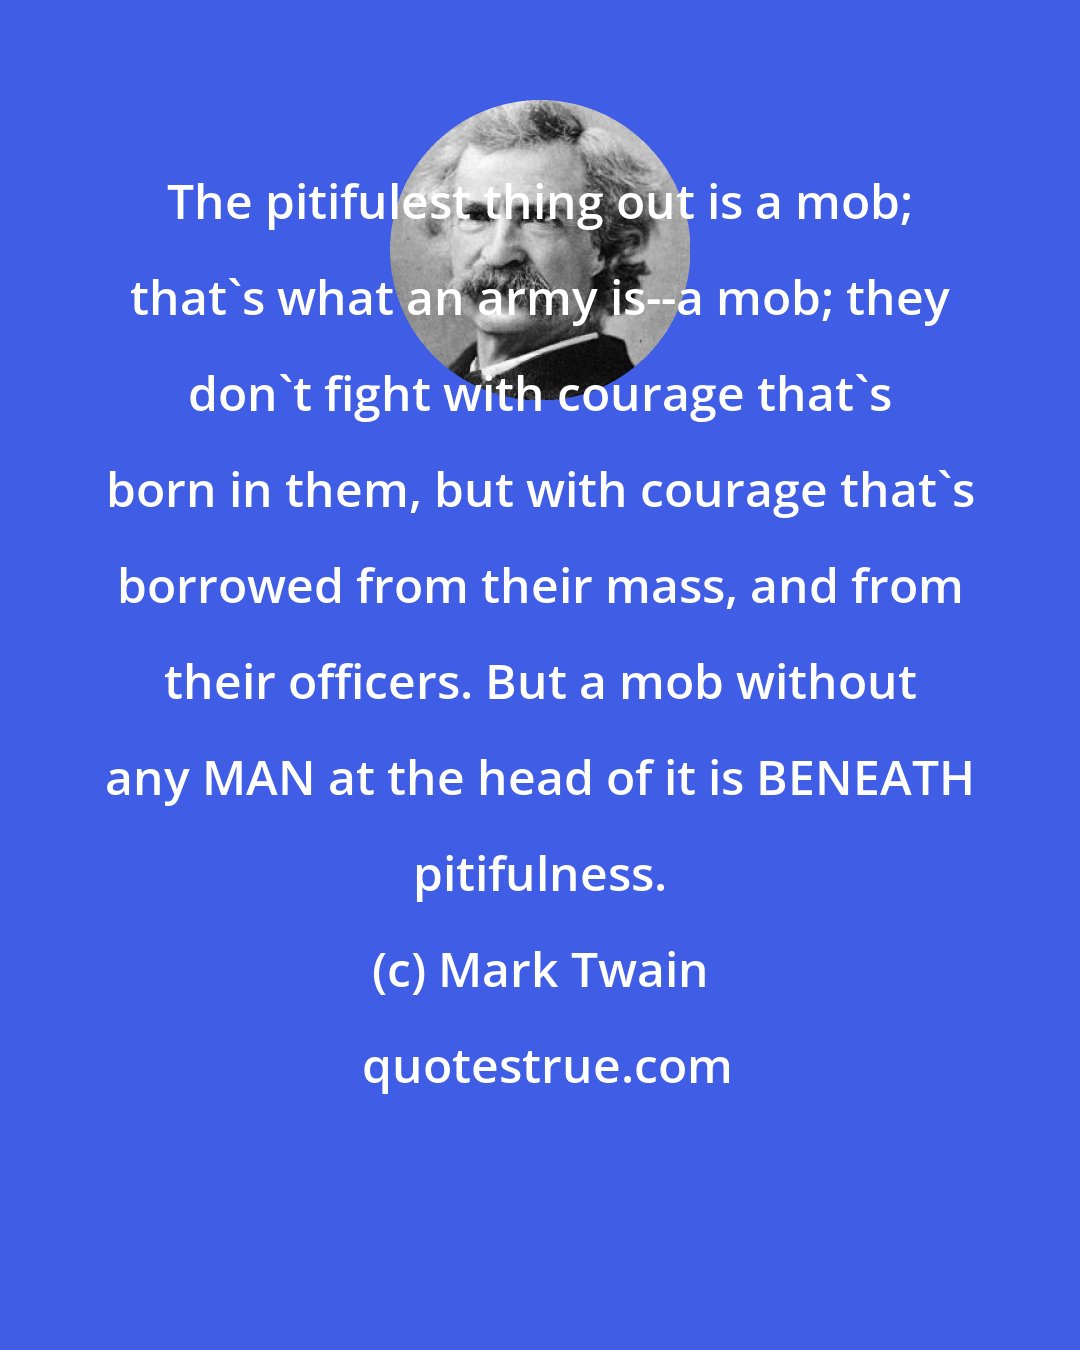 Mark Twain: The pitifulest thing out is a mob; that's what an army is--a mob; they don't fight with courage that's born in them, but with courage that's borrowed from their mass, and from their officers. But a mob without any MAN at the head of it is BENEATH pitifulness.